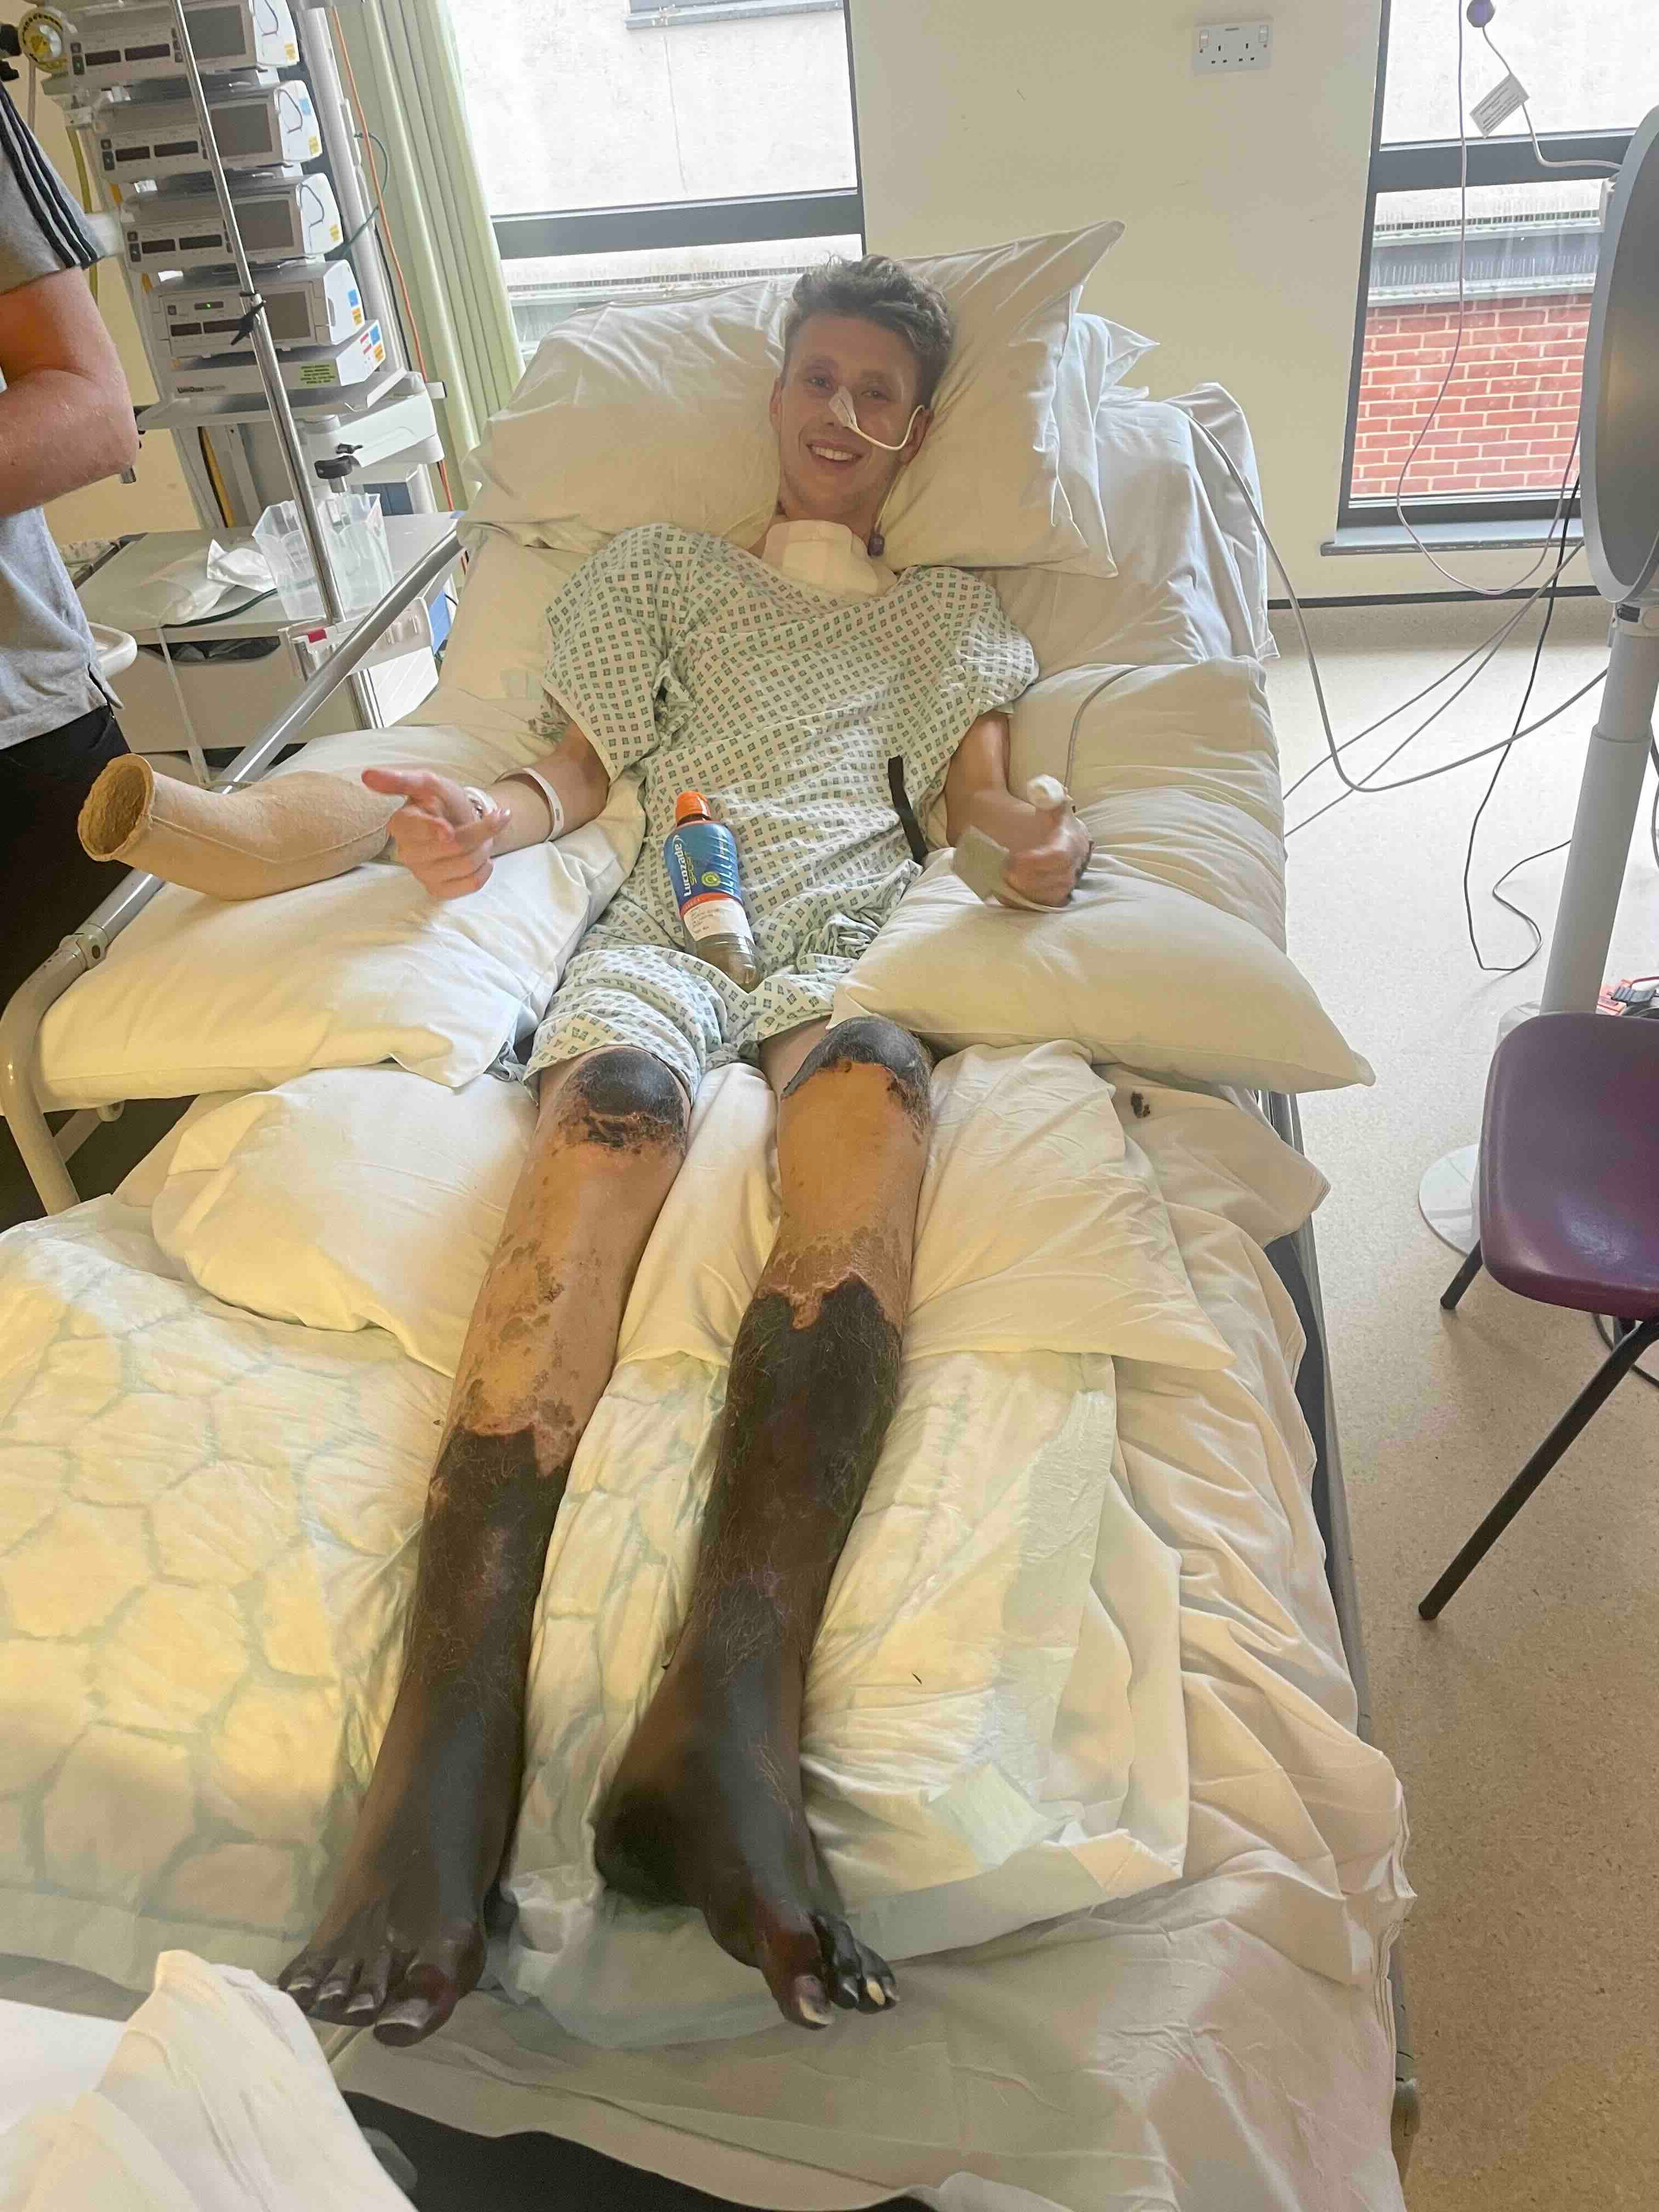 Footballer who went to hospital with flu symptoms has legs amputated after sepsis The Independent pic